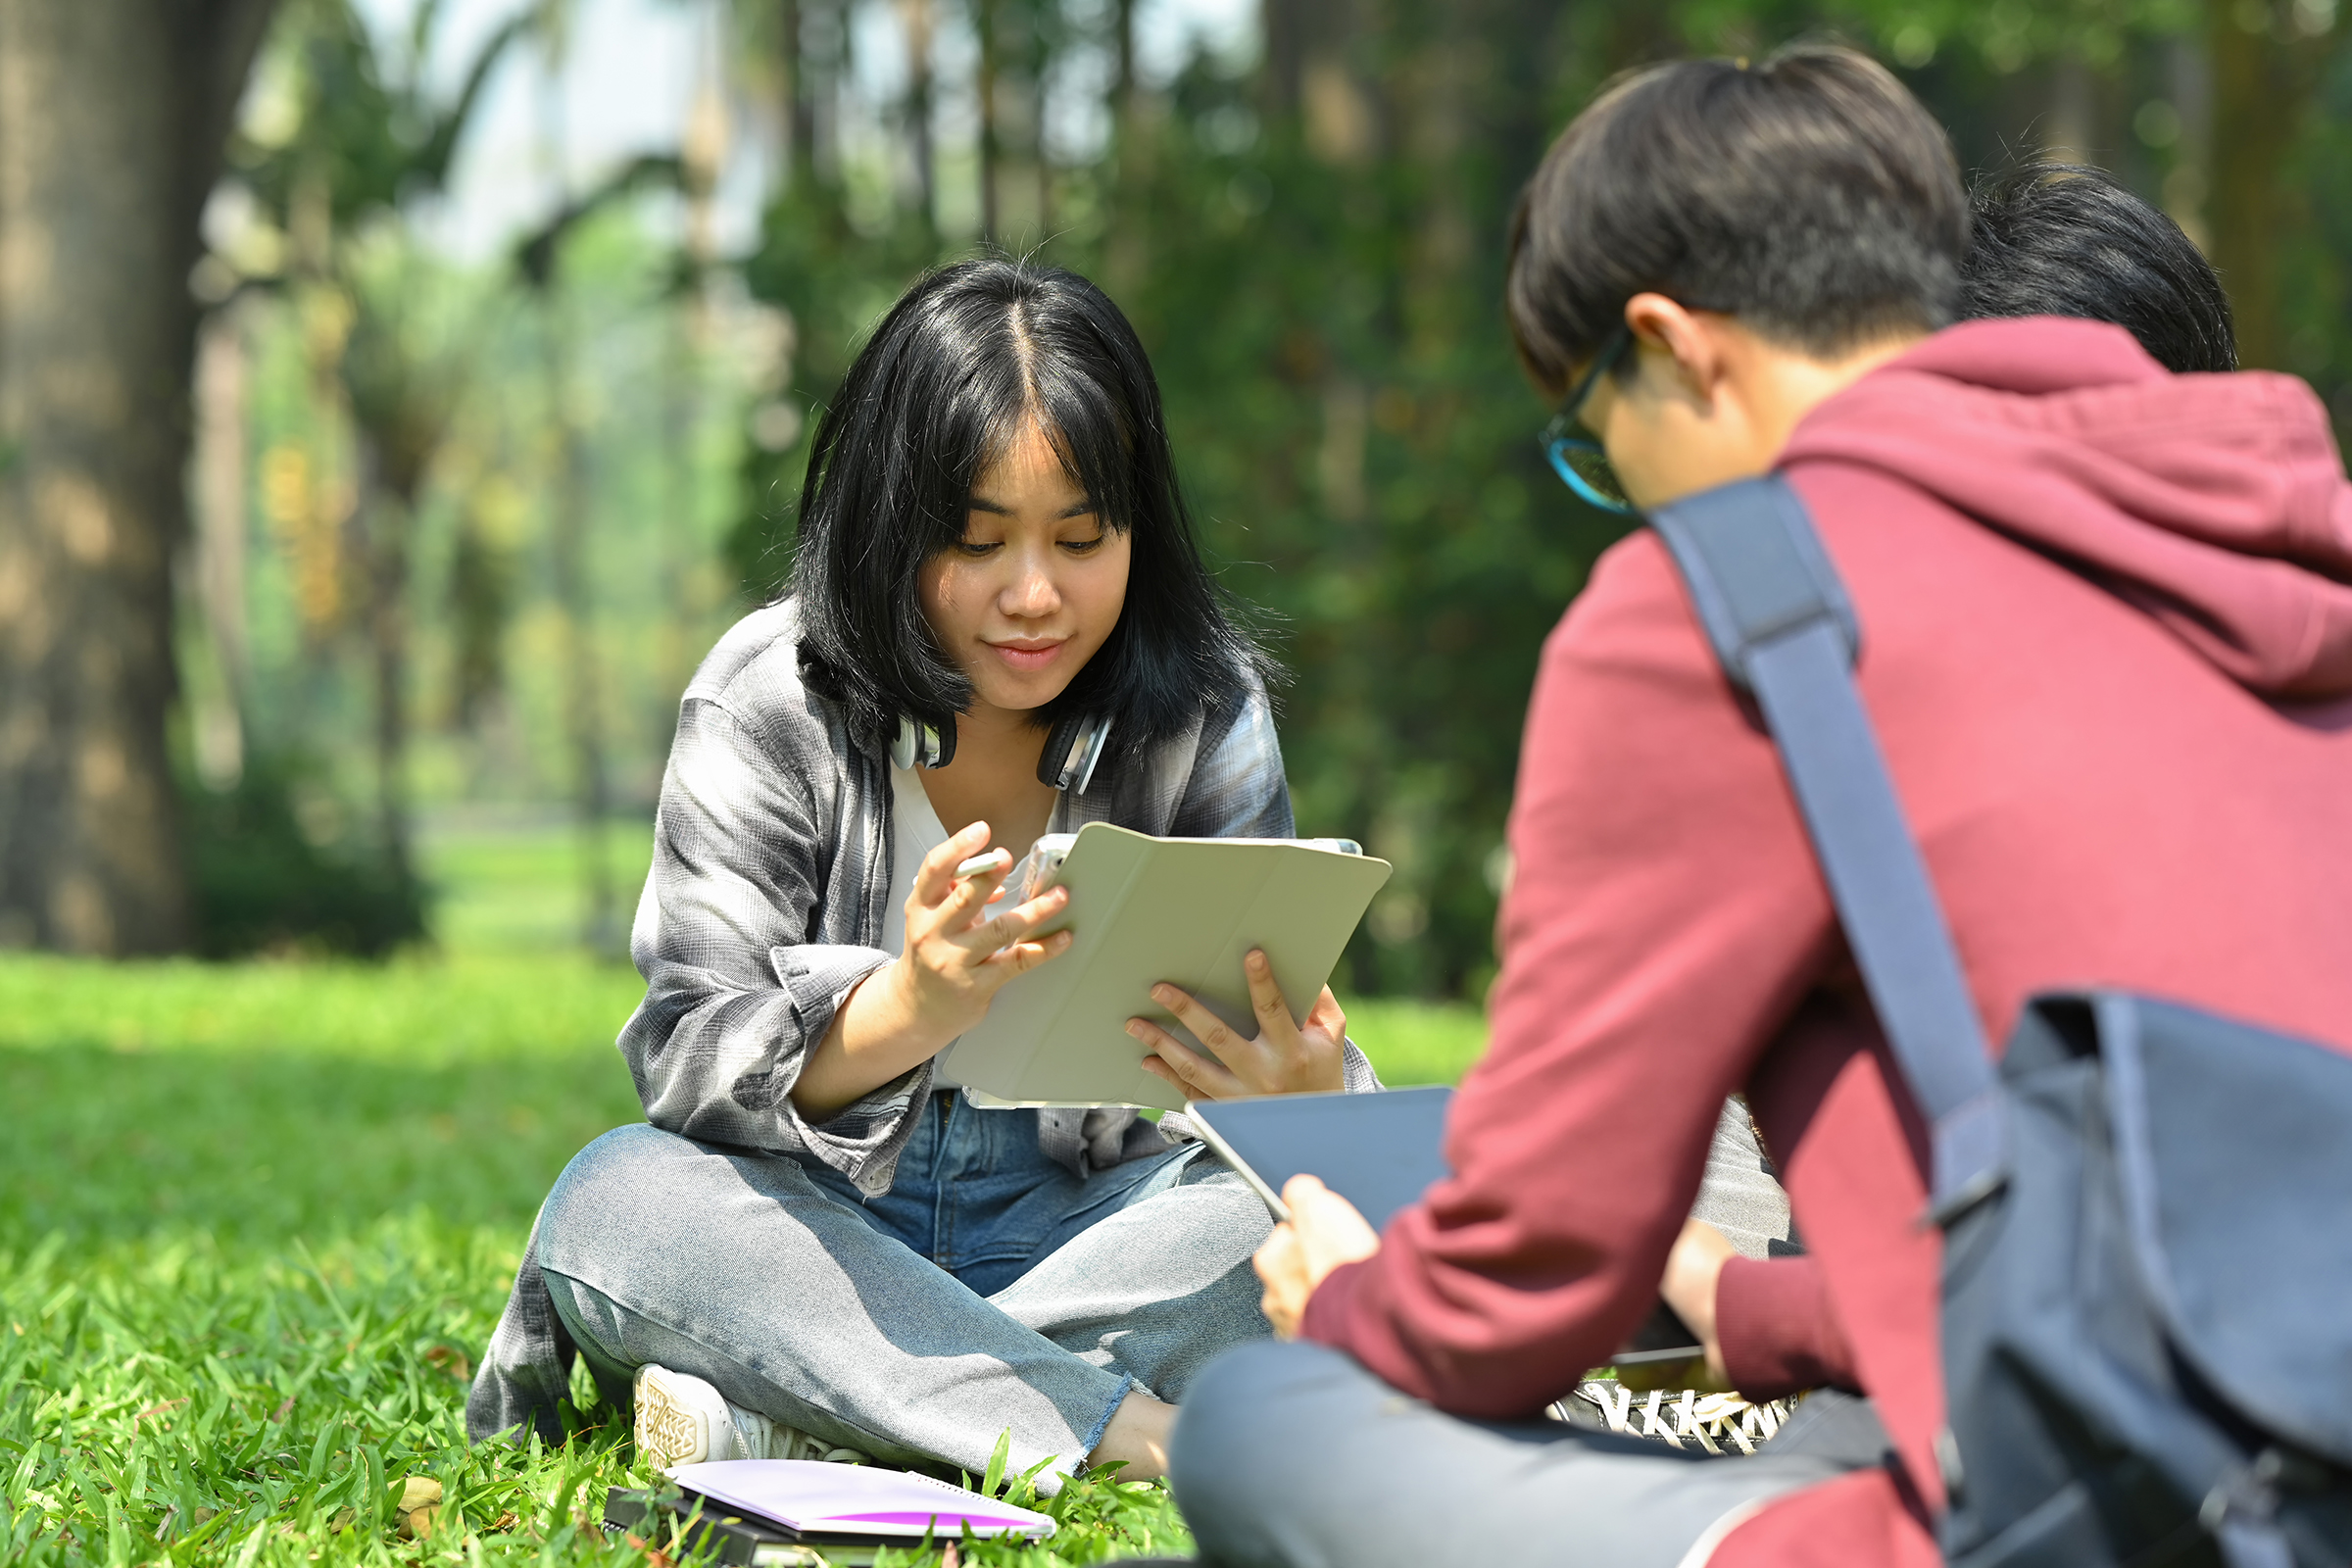 Image of a female student reading books with her friends at summer park.